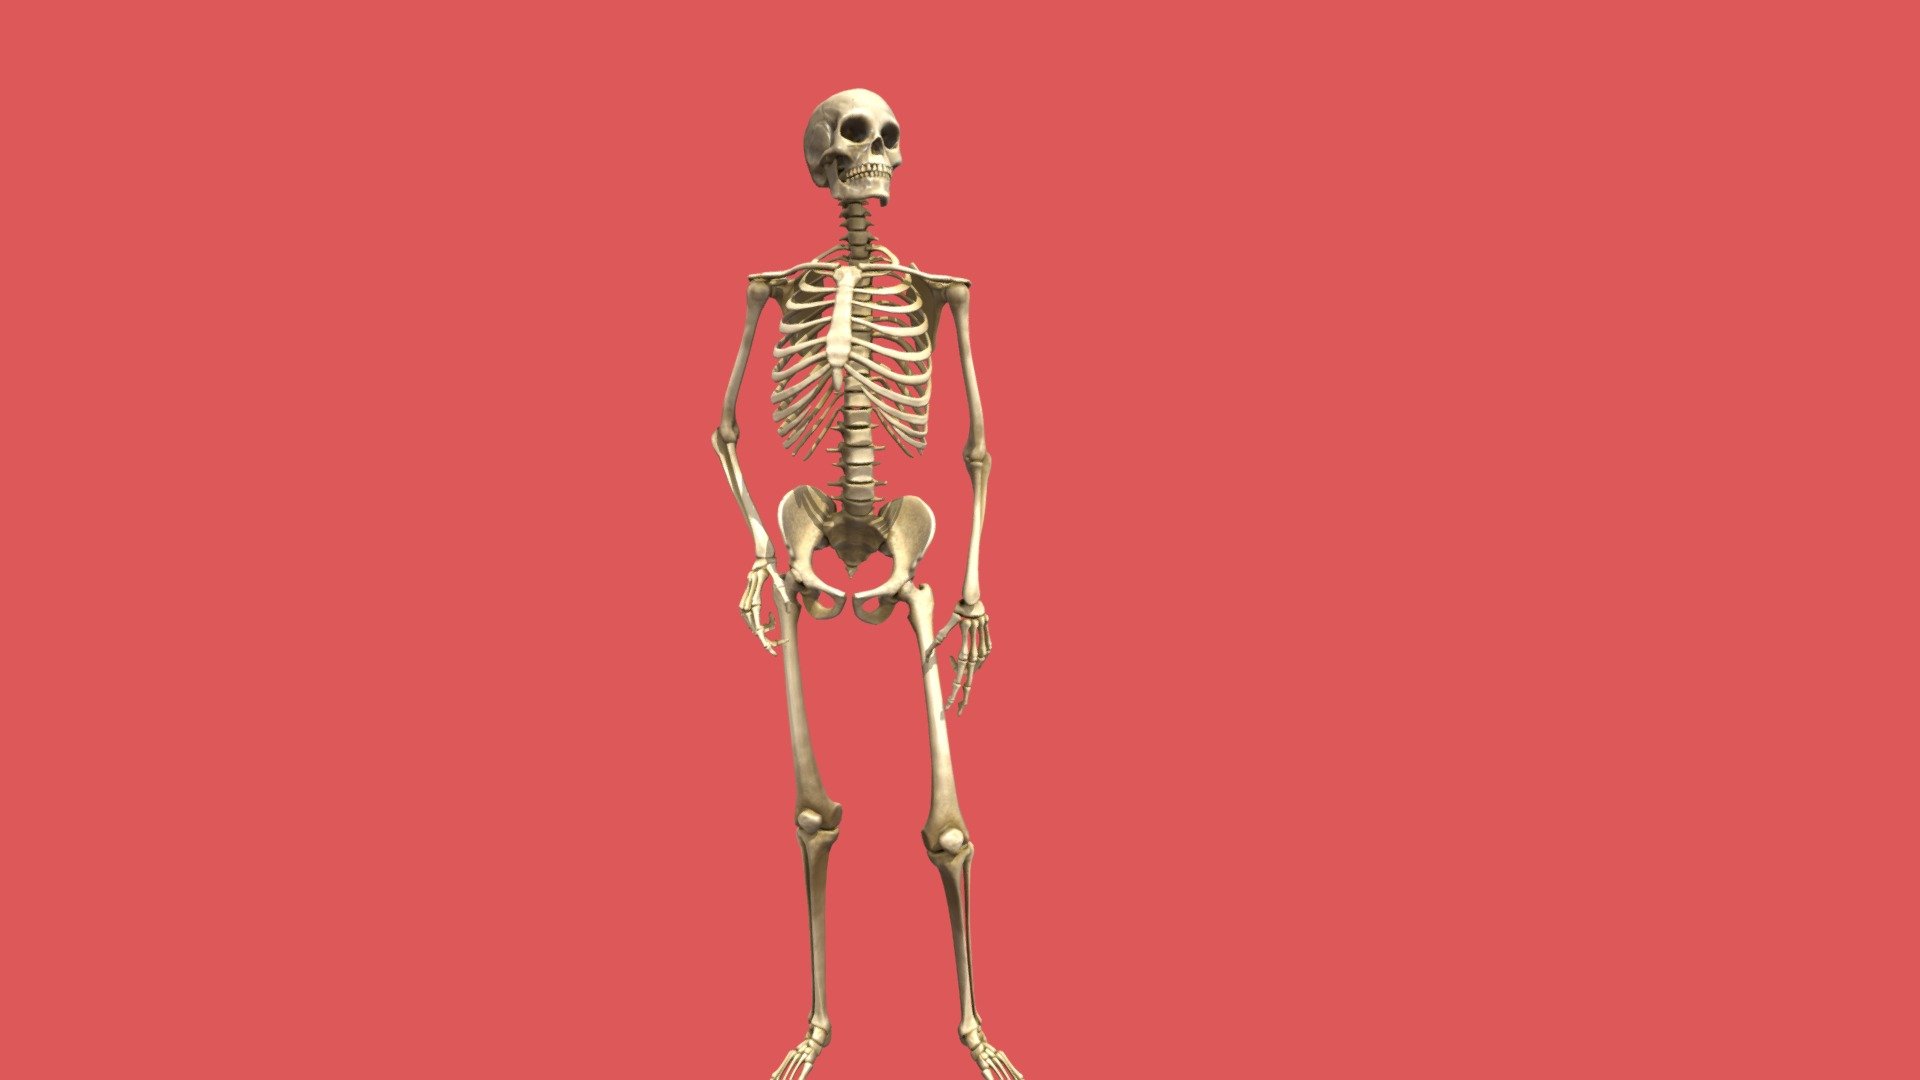 this is a &ldquo;Curious Skeleton